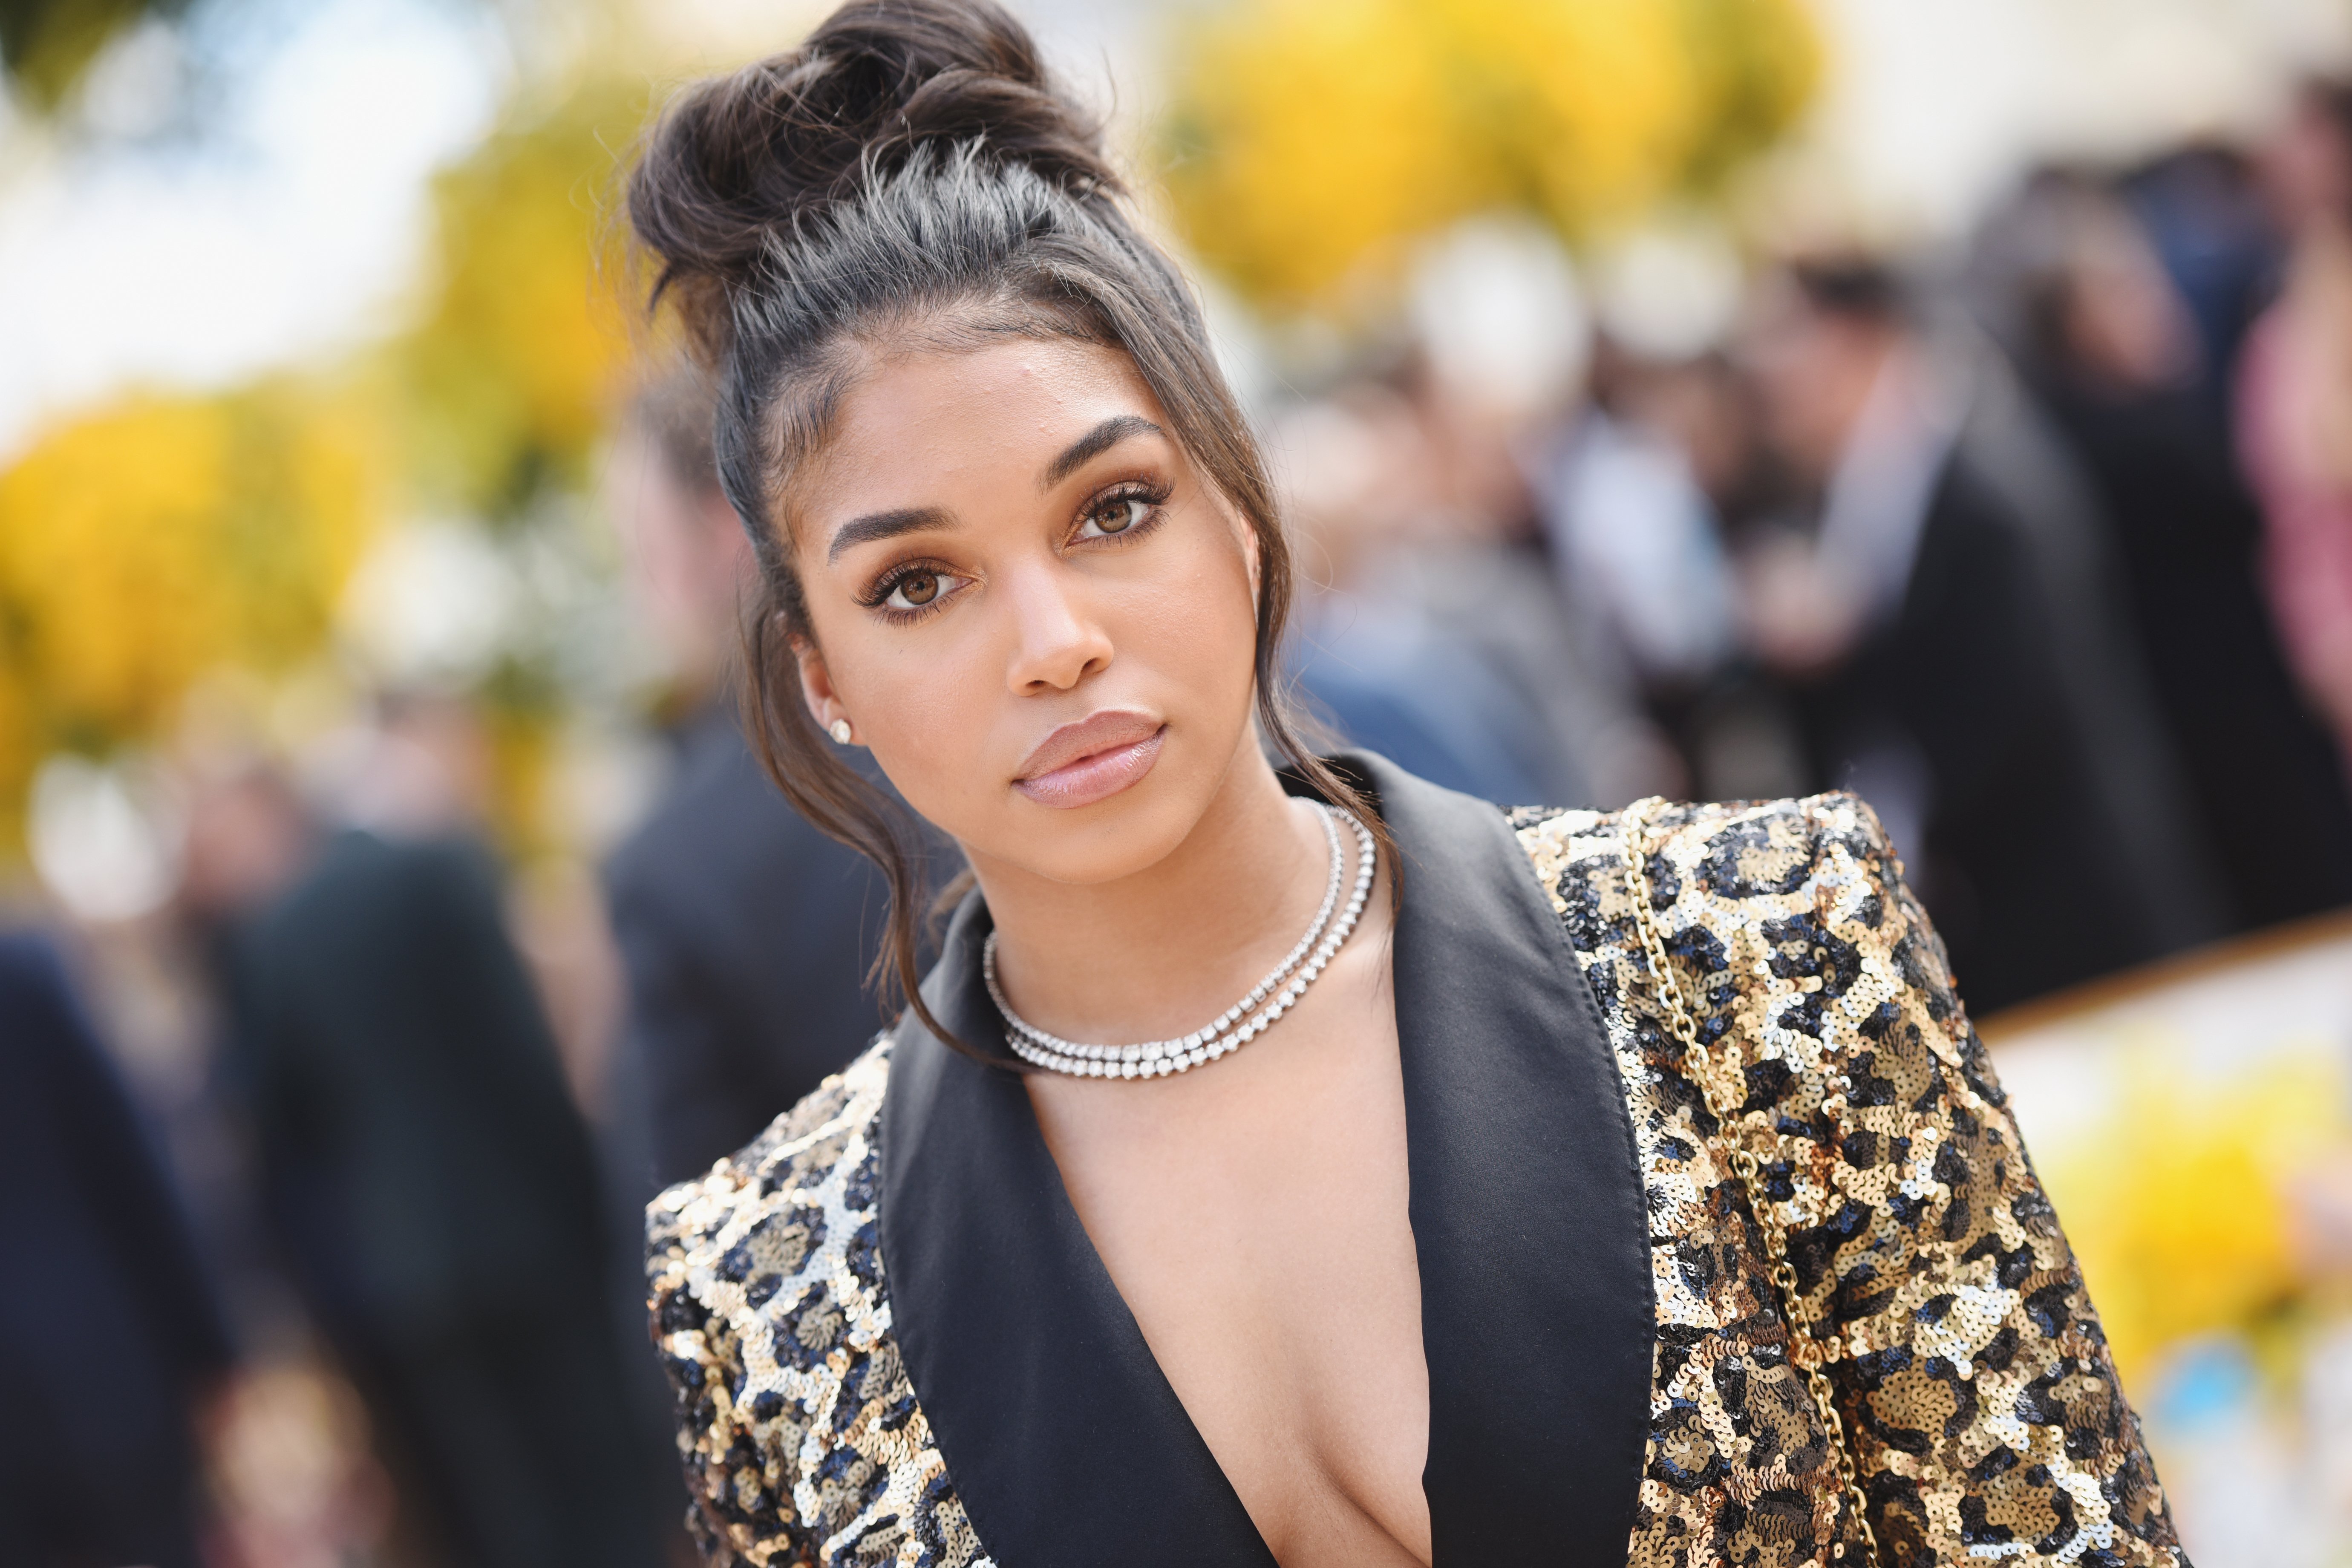 Lori Harvey attends the Roc Nation's "The Brunch" on February 9, 2019. | Source: Getty Images